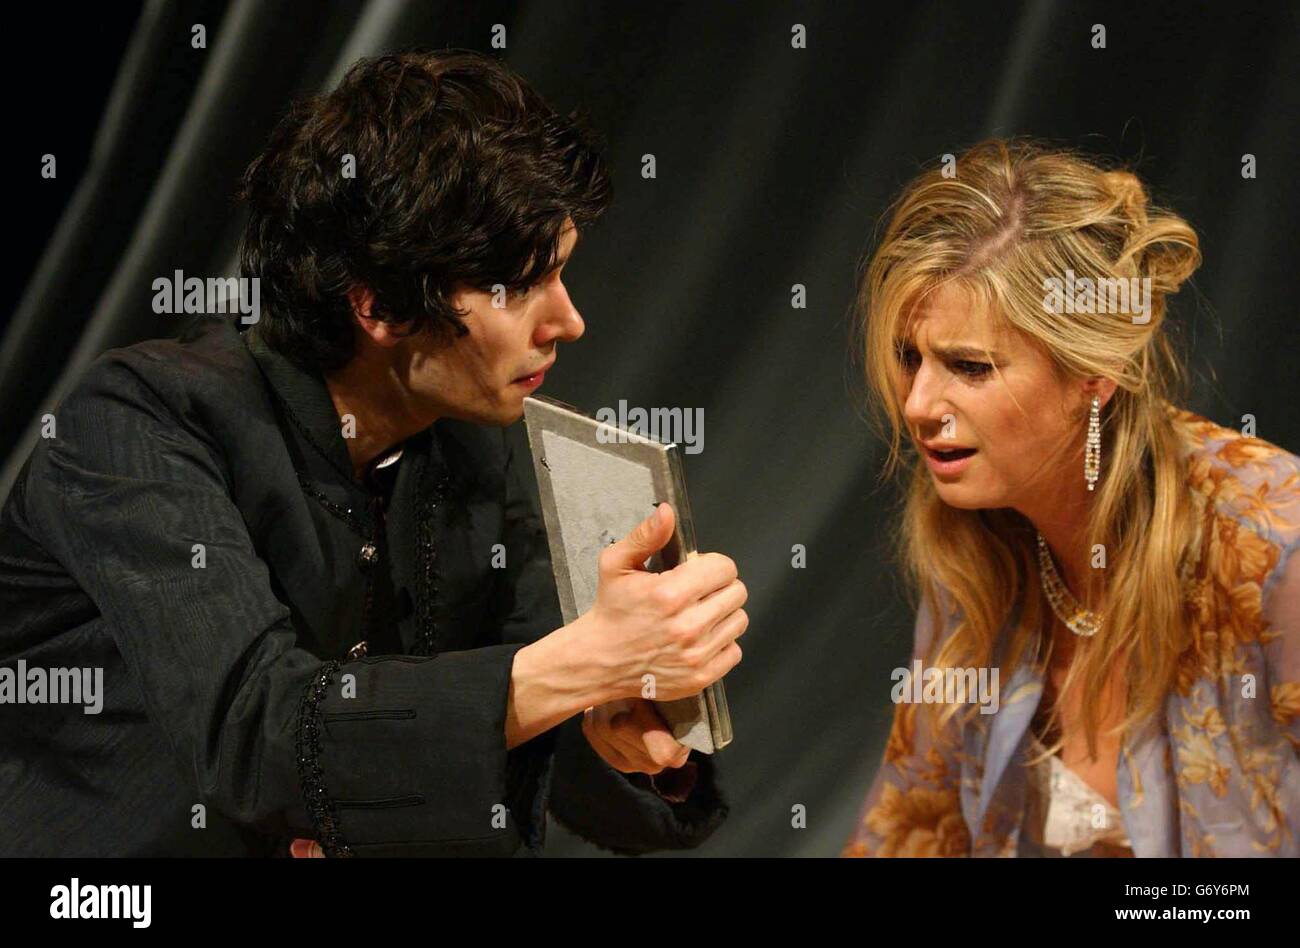 Actors Ben Whishaw as Hamlet, and Imogen Stubbs as Gertude, during a photocall for Shakespeare's Hamlet, directed by Trevor Nunn at the Old Vic Theatre in South London Stock Photo